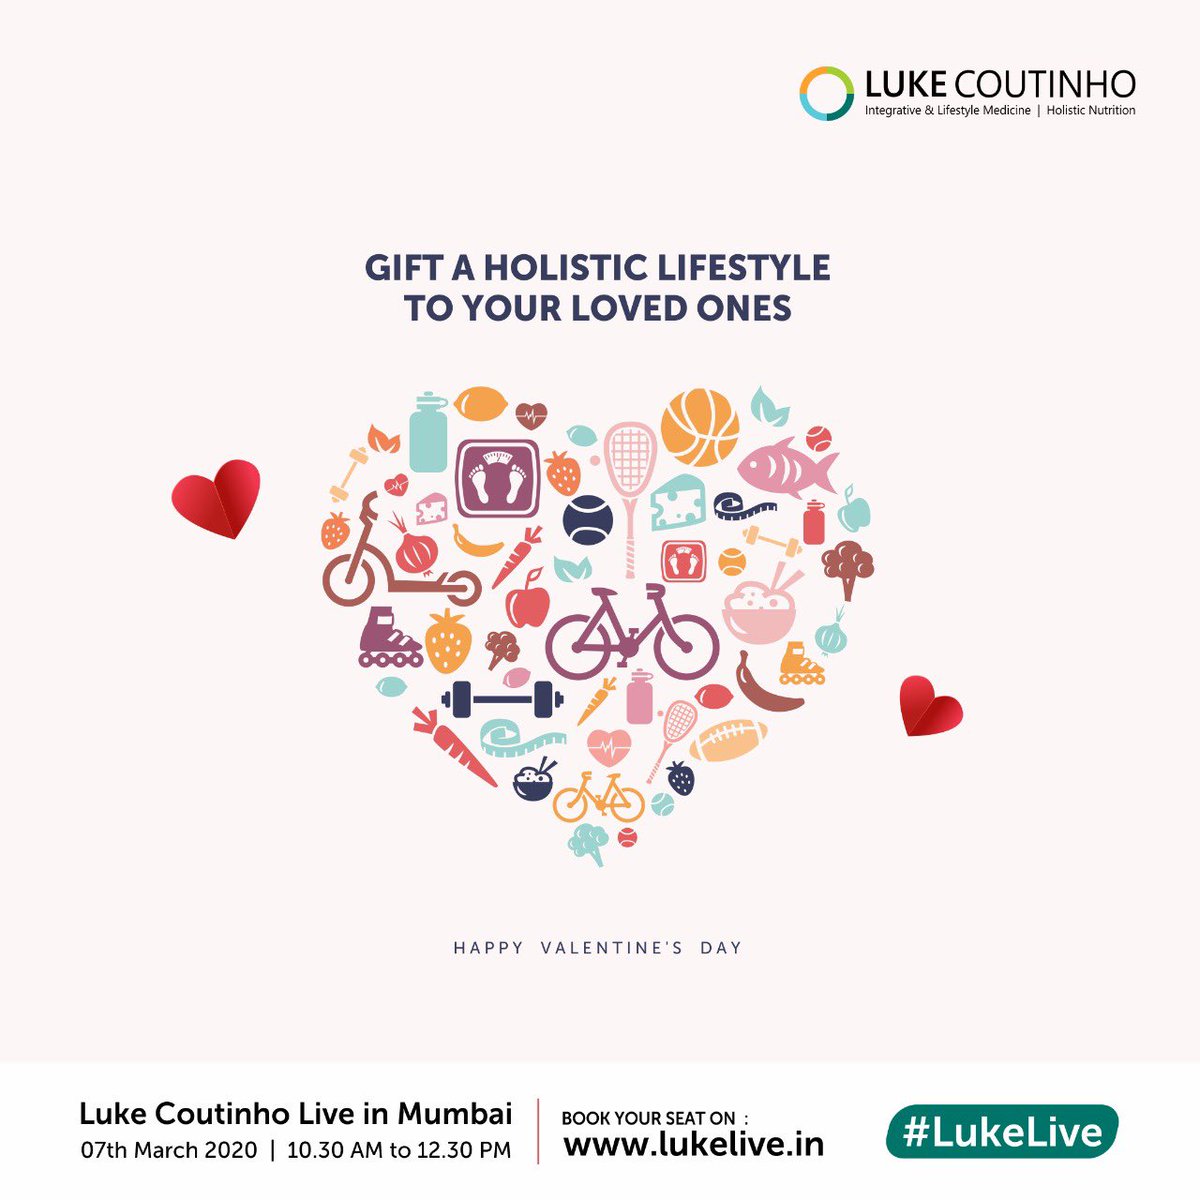 Gift your loved ones a valentine gift that will enhance their lifestyle. #LukeLive 
Visit lukelive.in 
And block your seats now 
@LukeCoutinho17